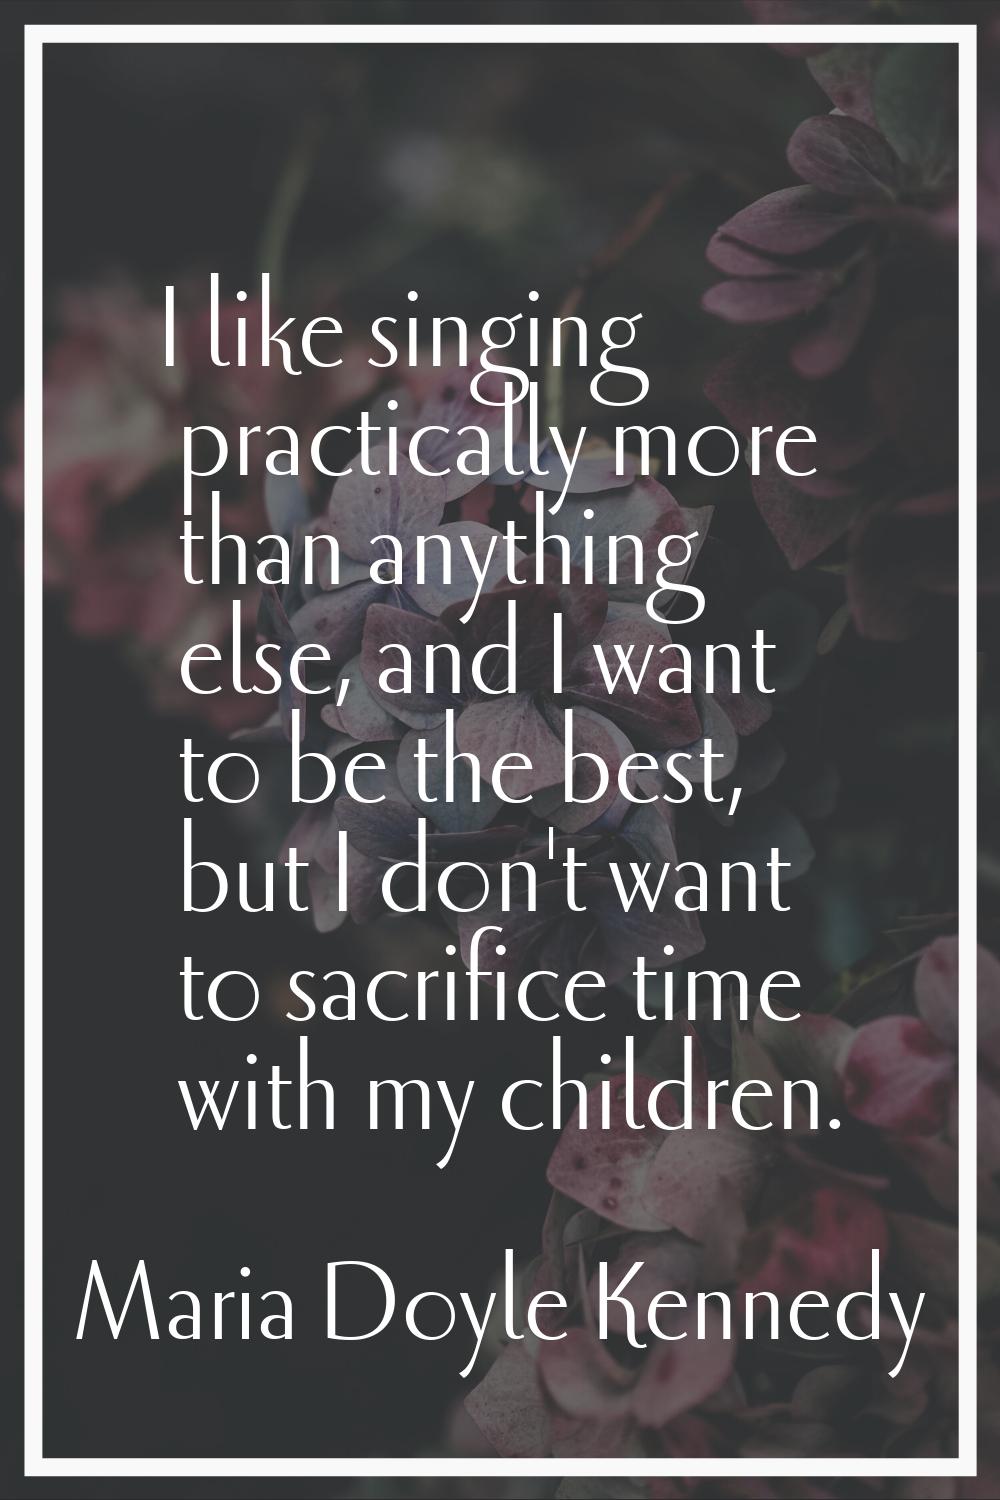 I like singing practically more than anything else, and I want to be the best, but I don't want to 